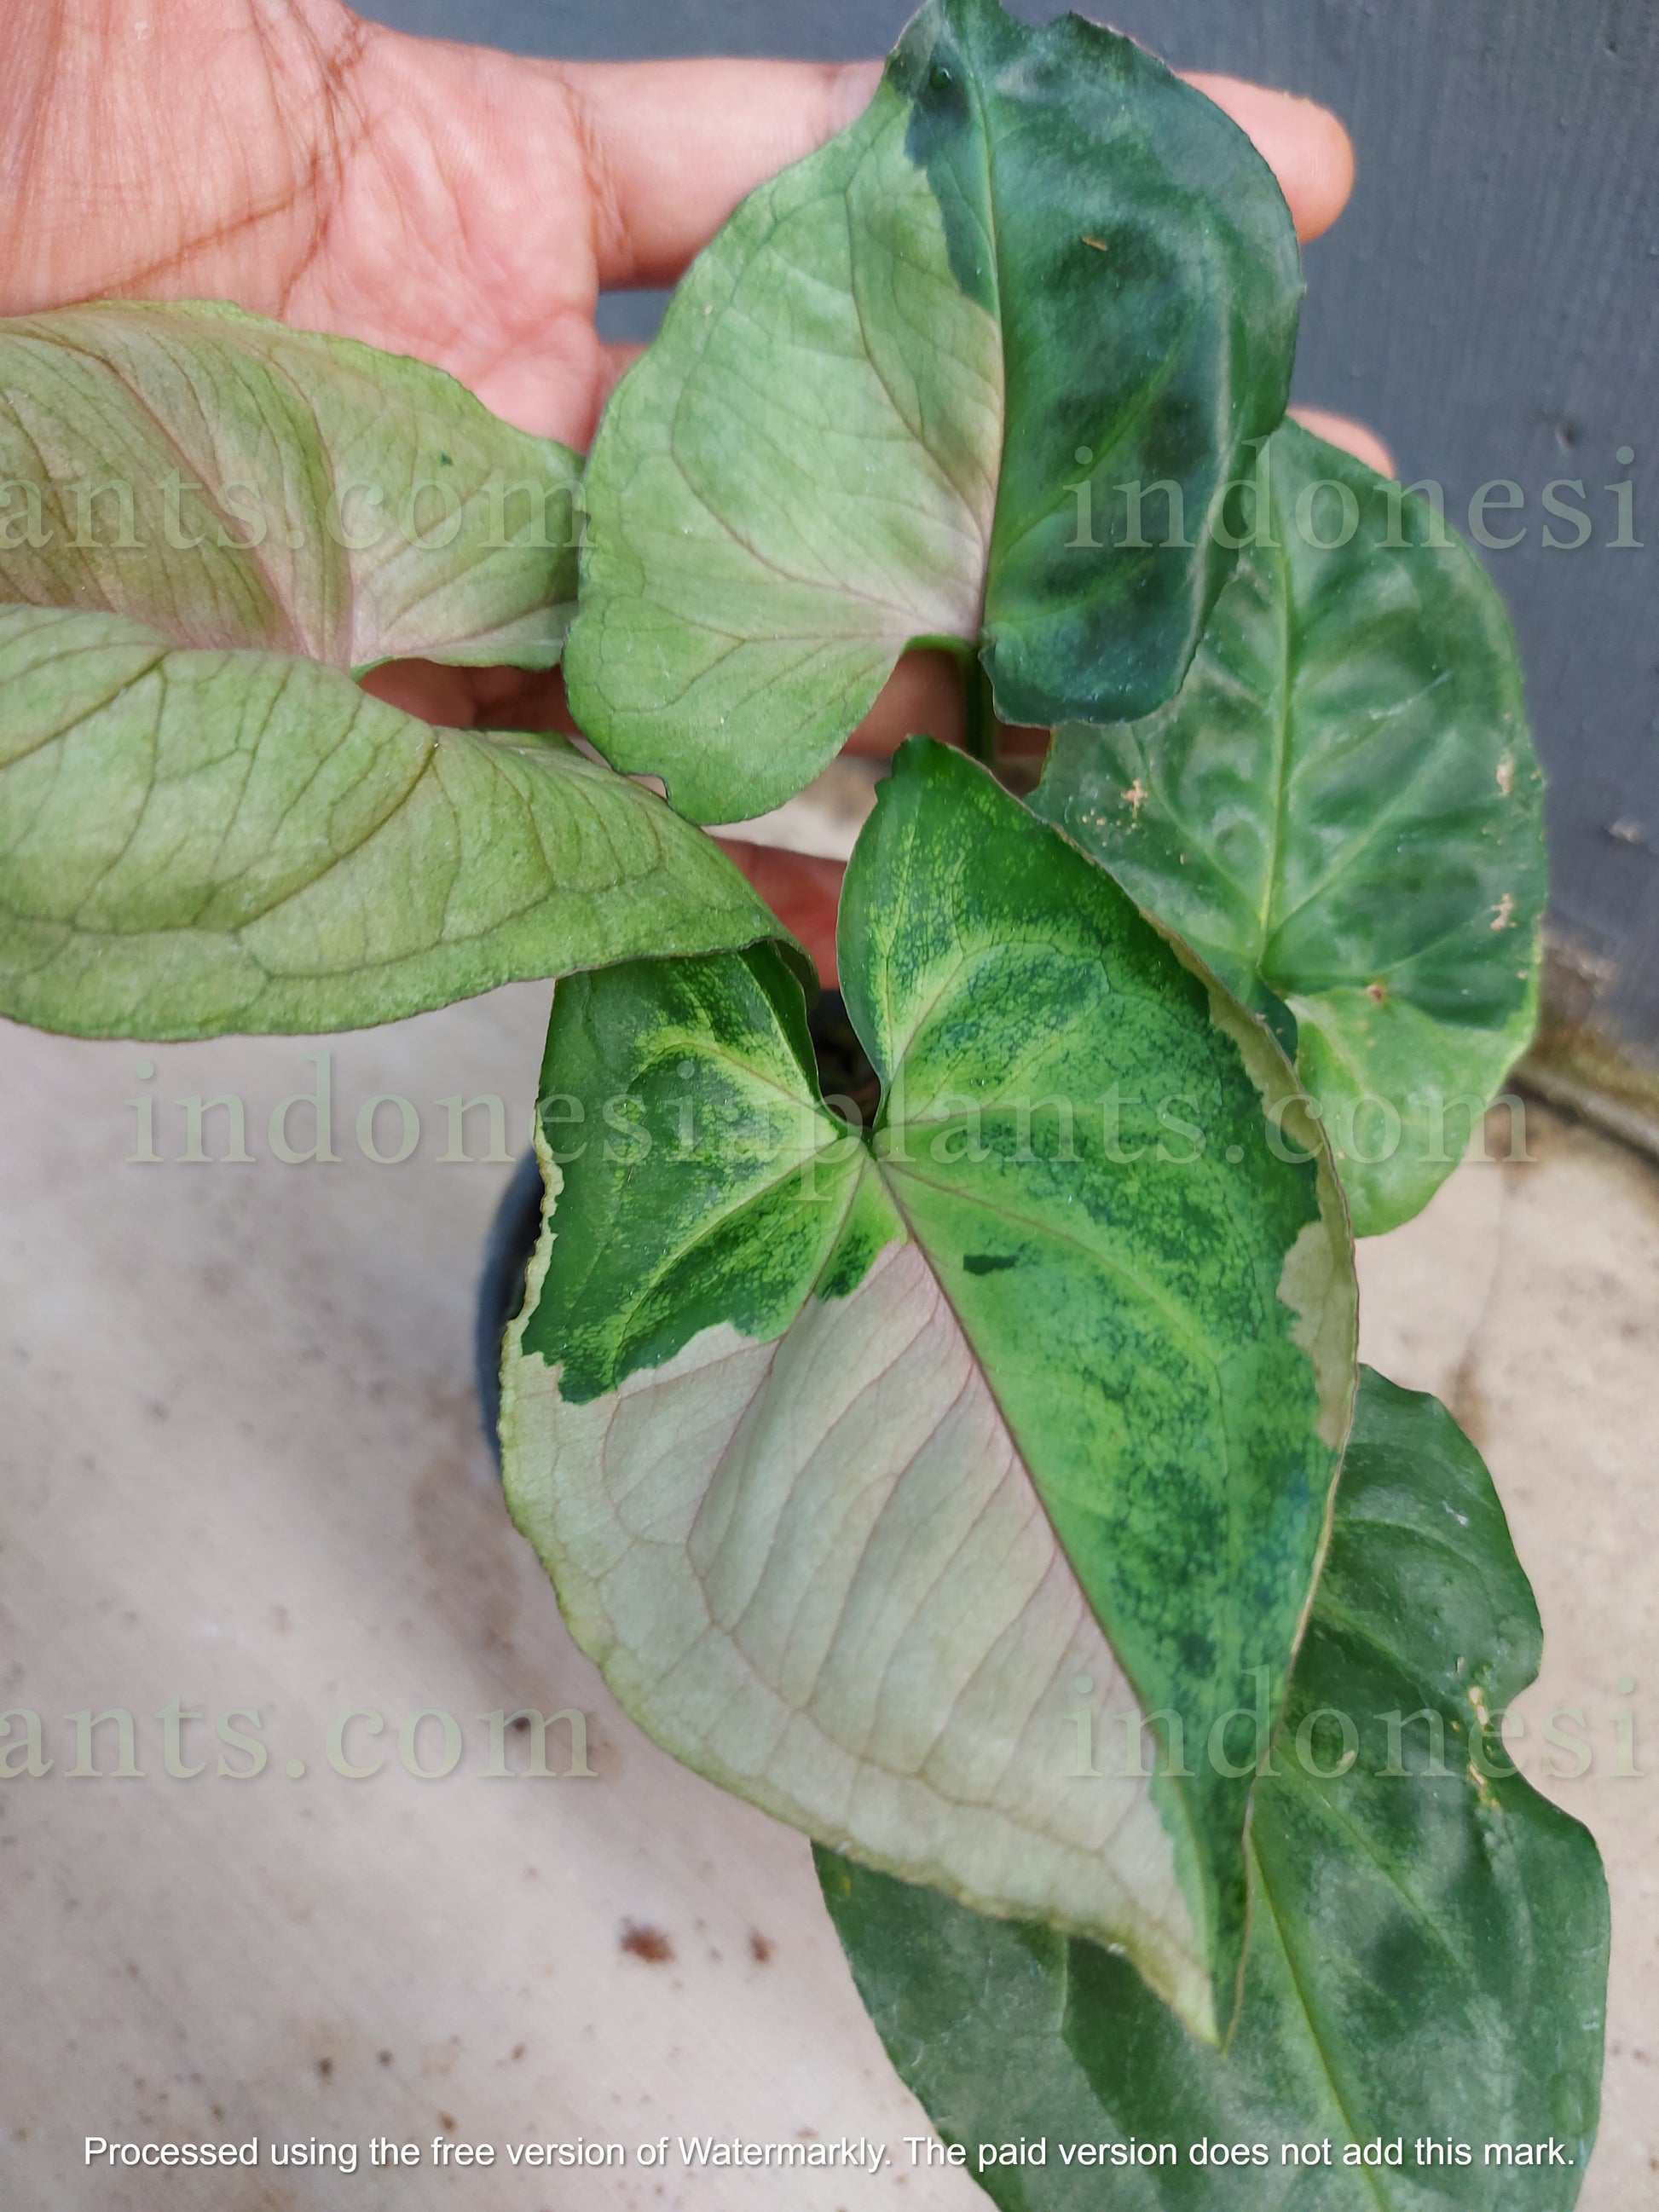 in genera, people only notice the syngonium t24. this syngonium t24 round form have smaller size of leaves and dimensions is also smaller. it takes longer time for them to grow big in leaves size. on top of all that, syngonium t24 round form have almost 100% of variegated leaves.